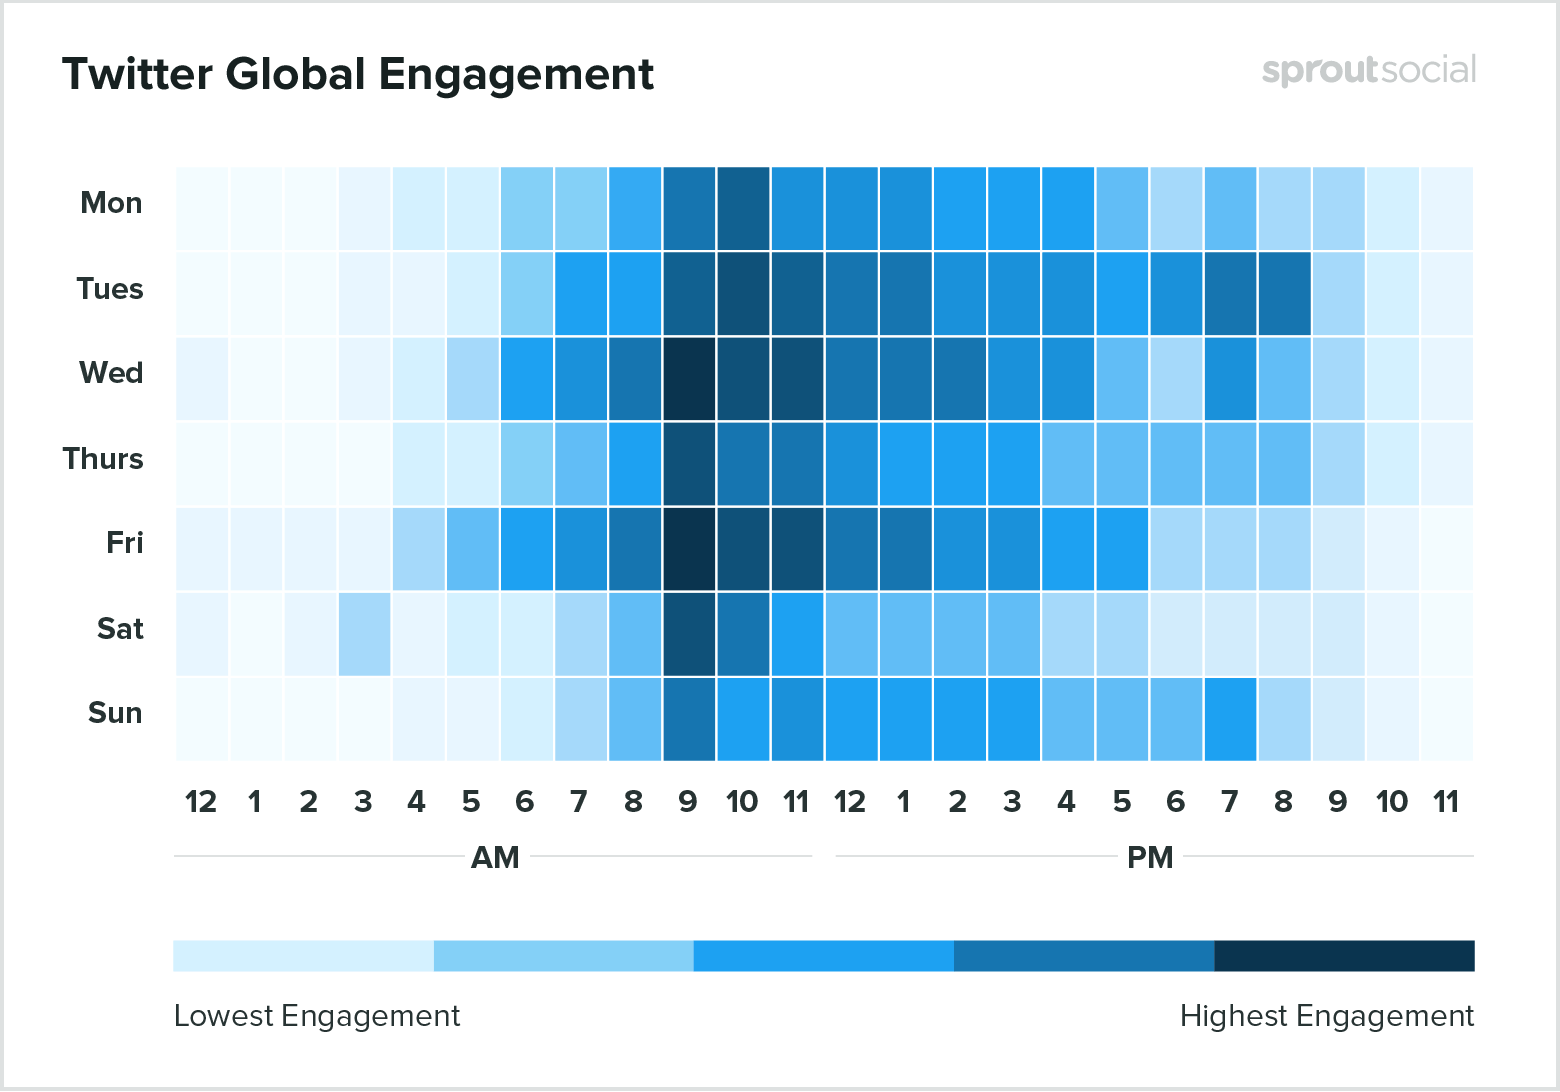 Best times to post and engage on Twitter